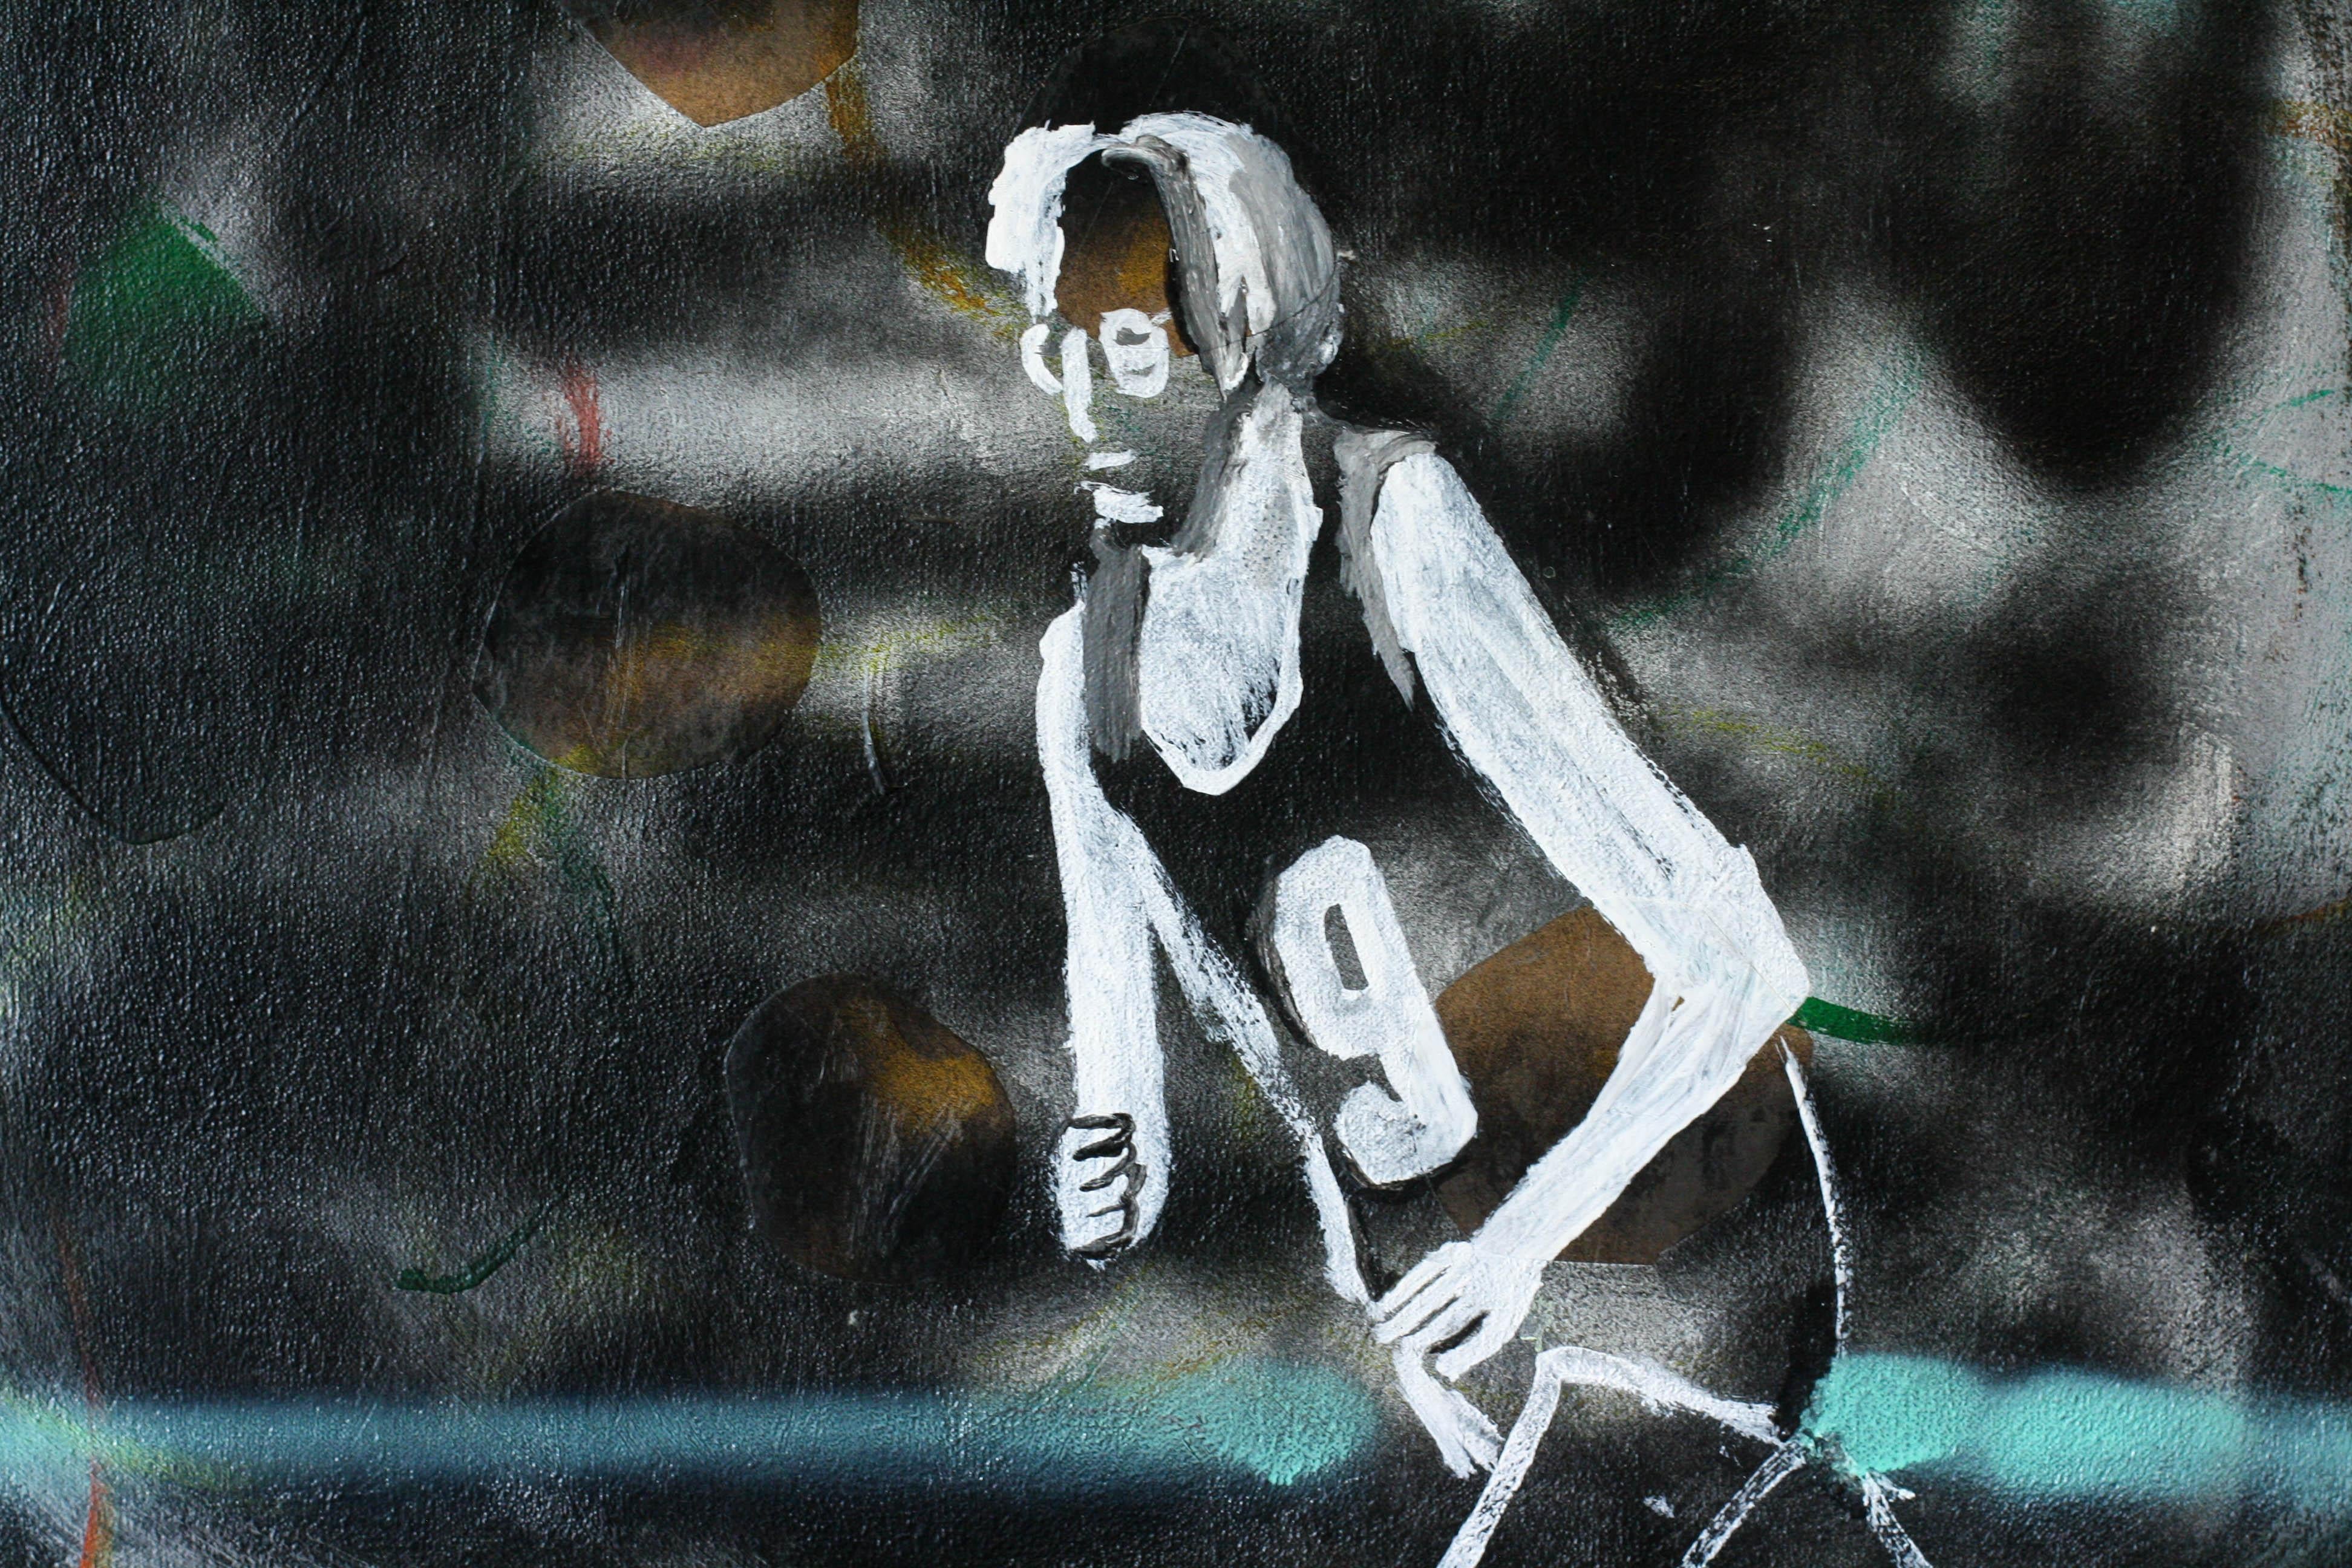 New Life- Acrylic Paint, Canvas, Paper, Spray Paint, Figurative, Abstract, Sport - Black Figurative Painting by John Paul Kesling